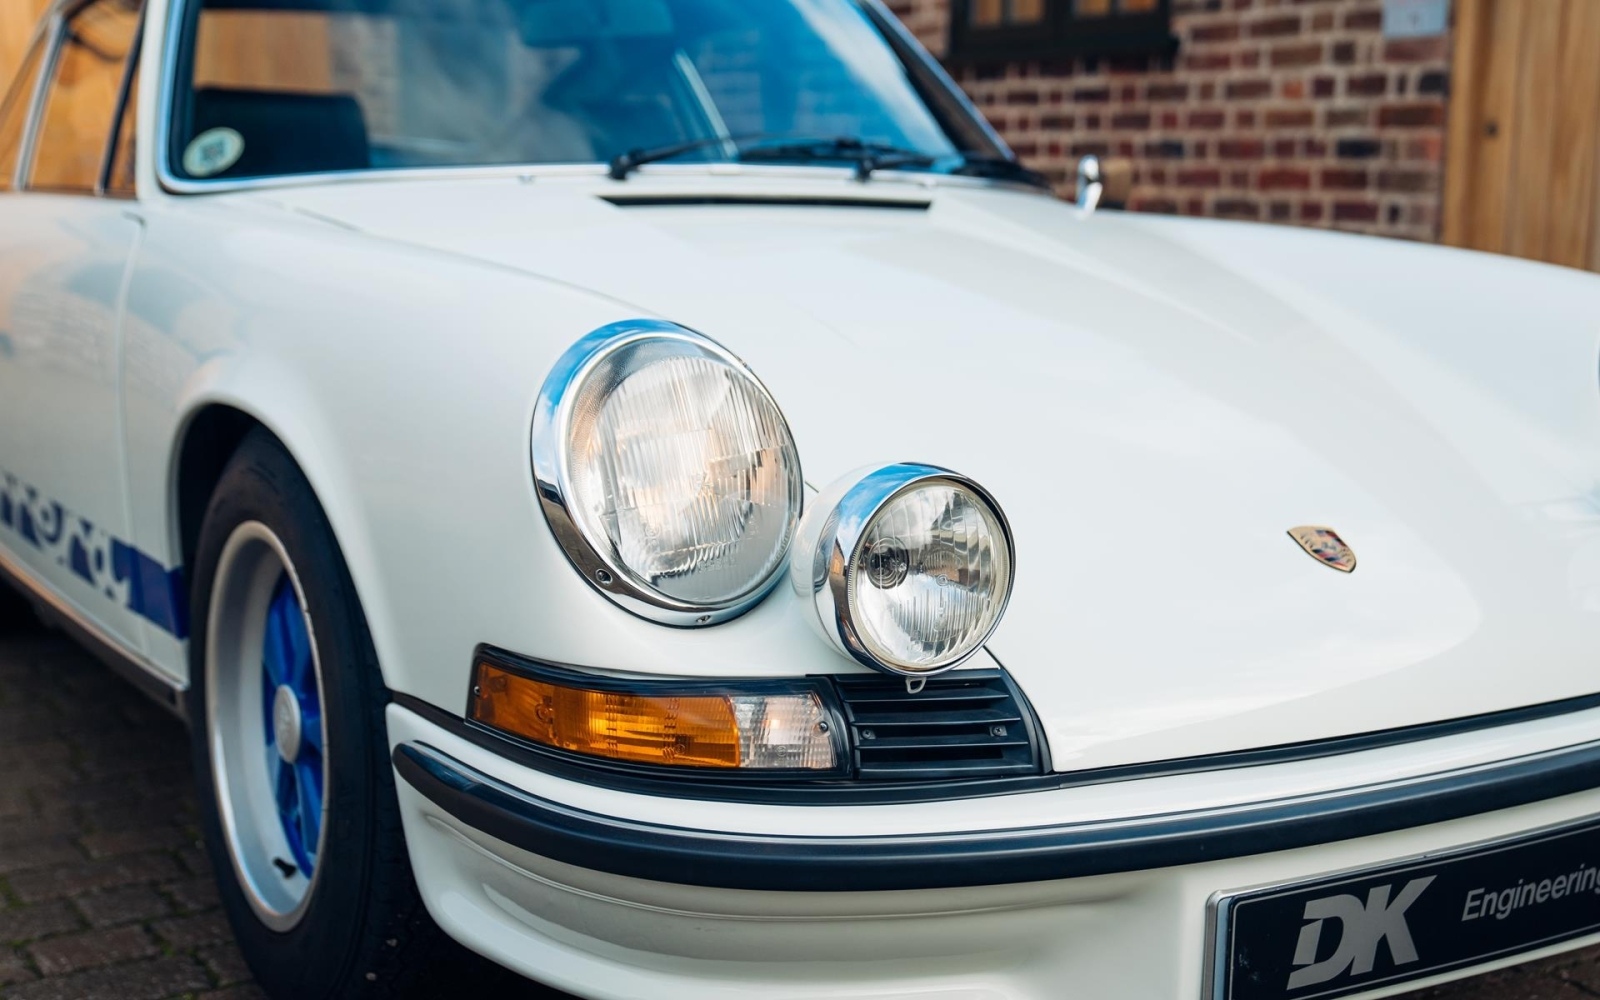 Porsche 911  Carrera RS Touring for sale - Vehicle Sales - DK Engineering